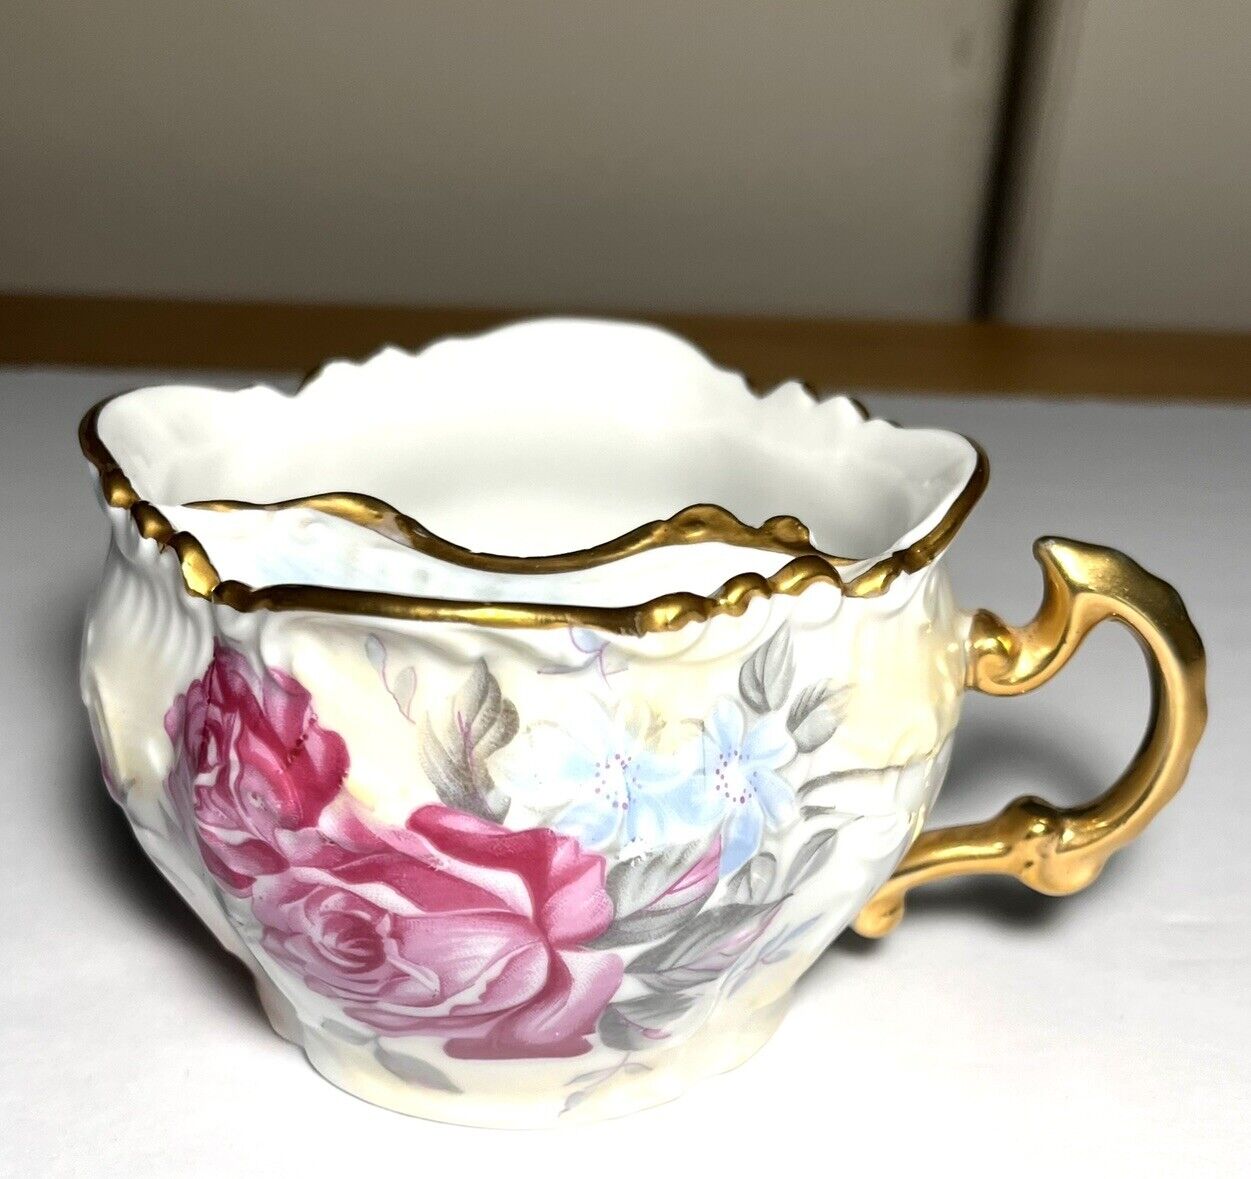 Ornate Antique Mustache Tea Cup Hand Painted Roses Gold Gilt Trim And Handle